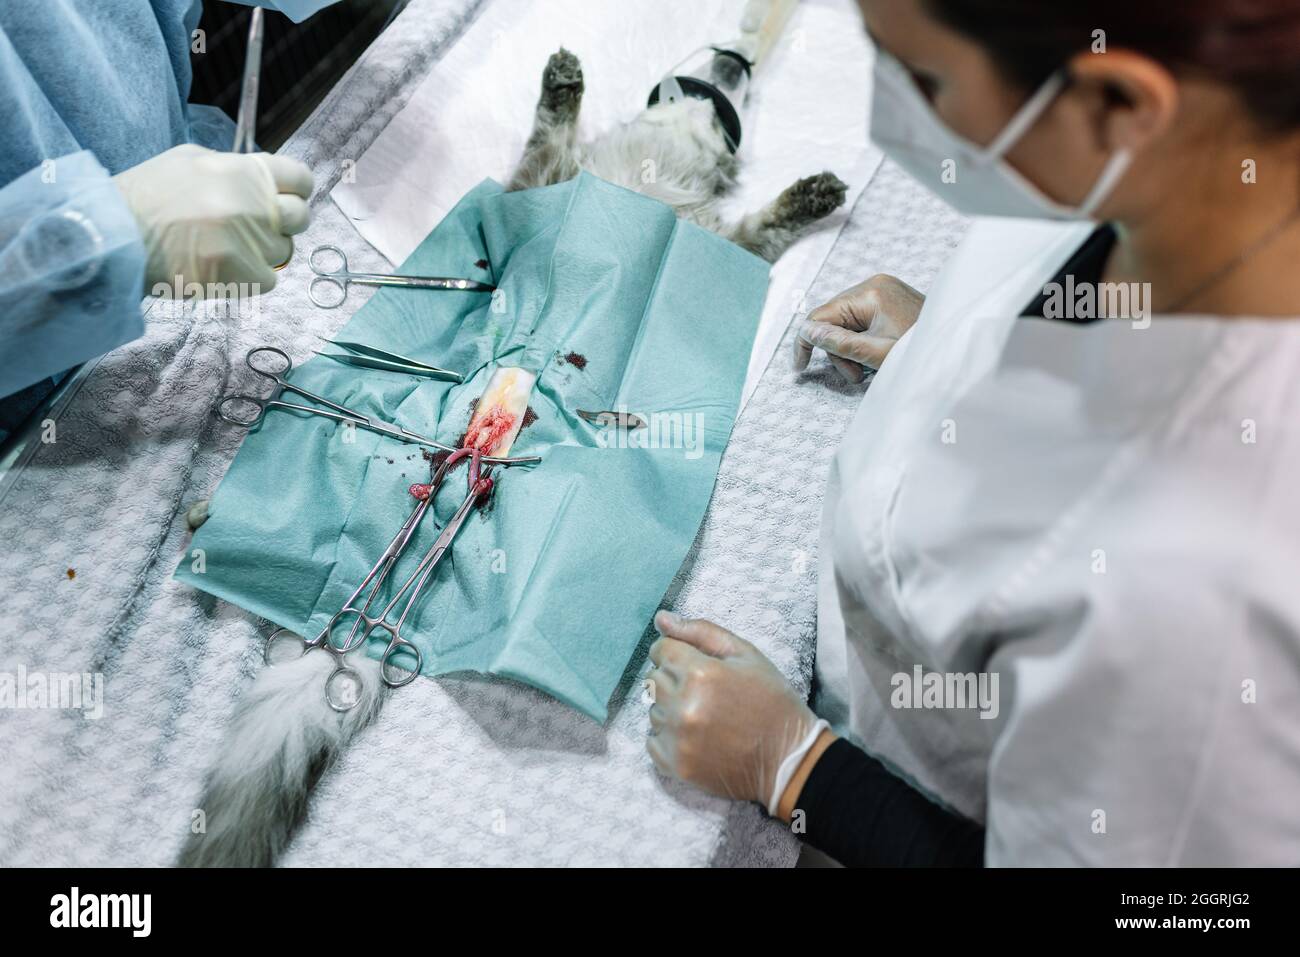 Team of veterinarians surgeons operating an animal in a veterinary clinic. Stock Photo